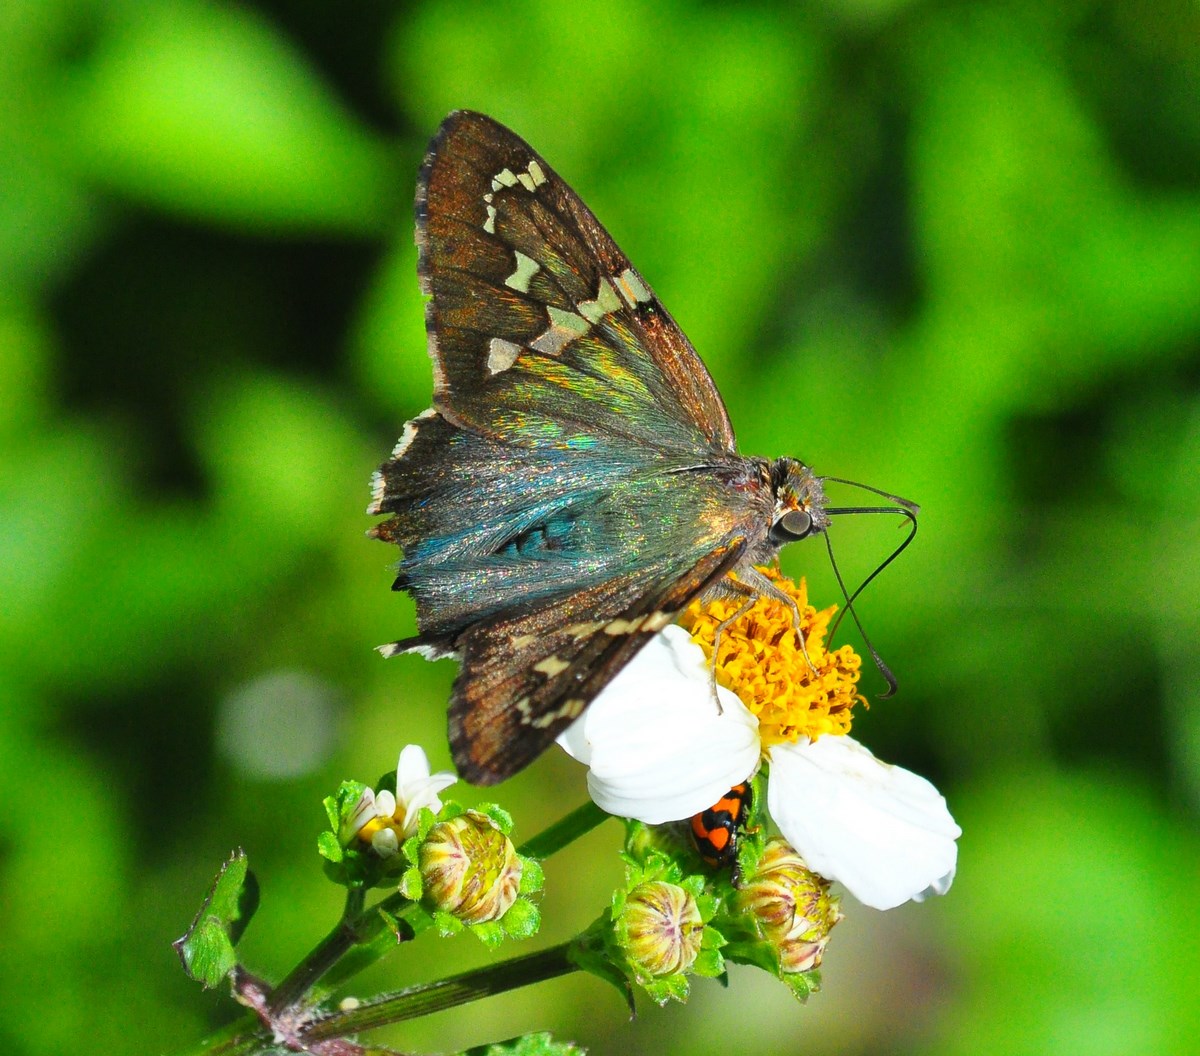 "Skipper Butterfly on Flower at Enchanted Forest Park"